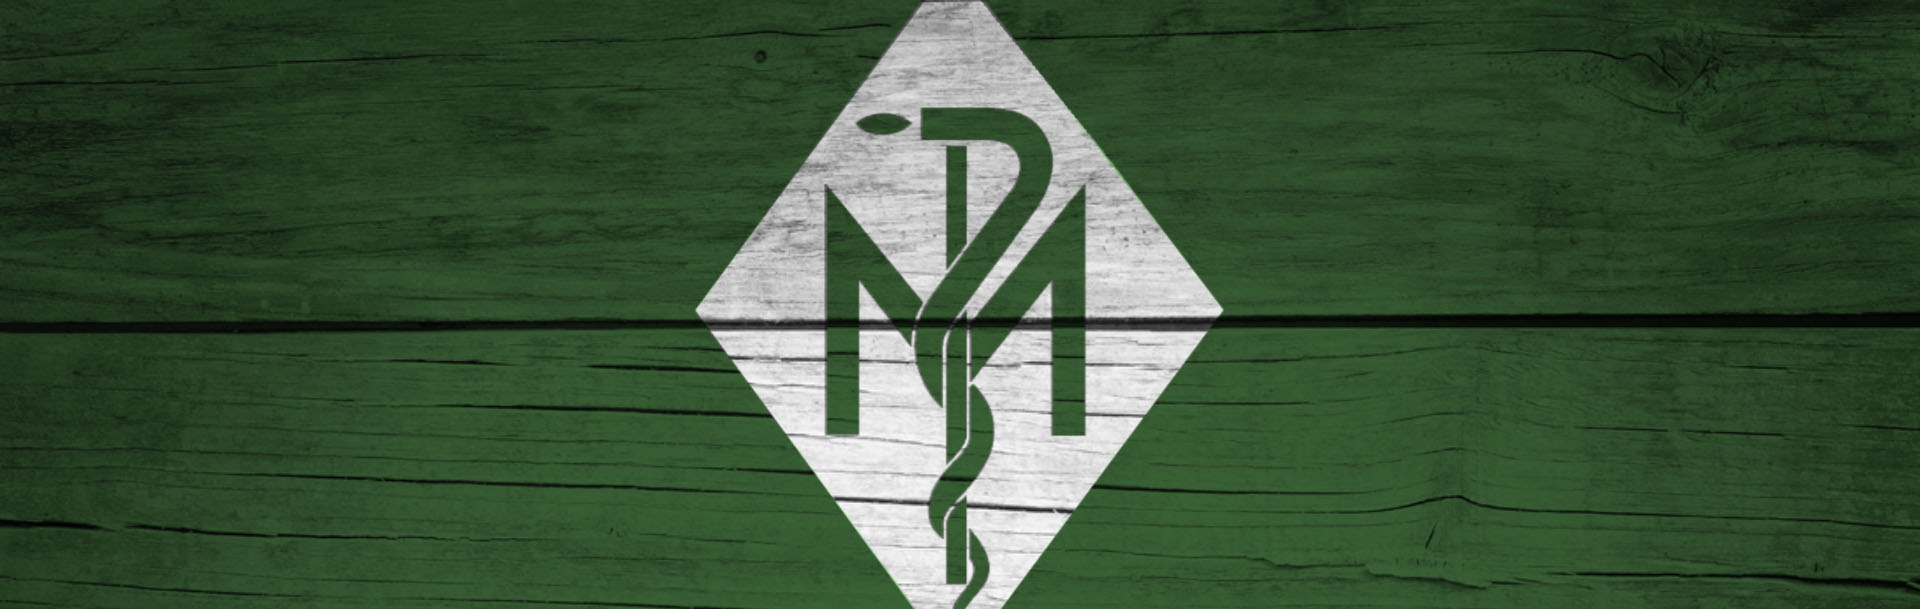 Logo of Müggenburg Pflanzenliche Rohstoffe GmbH & Co. KG in white on a green background with a wooden structure